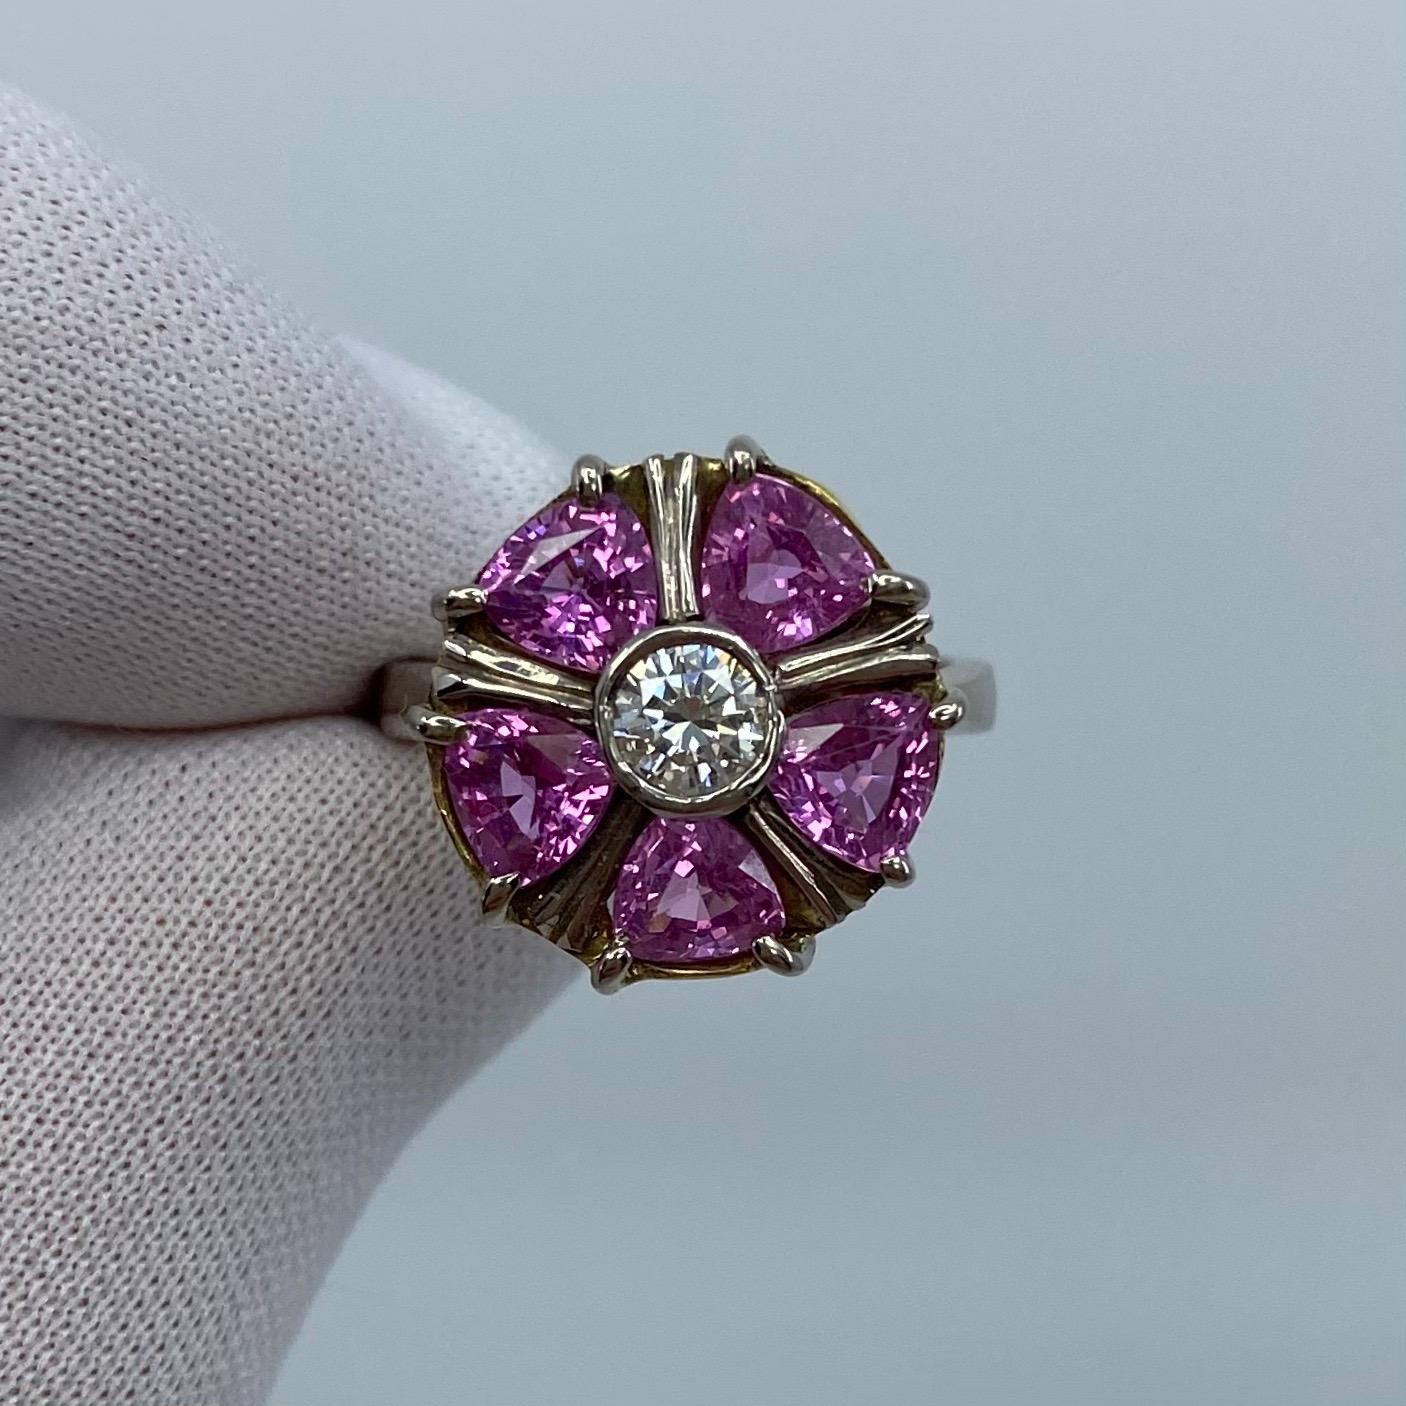 Vivid Pink Sapphire & Diamond 18 Karat White Gold Art Nouveau Style Ring.

A beautiful cocktail ring set with approx 2 carat of vivid pink sapphires and a 0.34ct centre diamond. 
All the sapphires have very good to excellent clarity with an